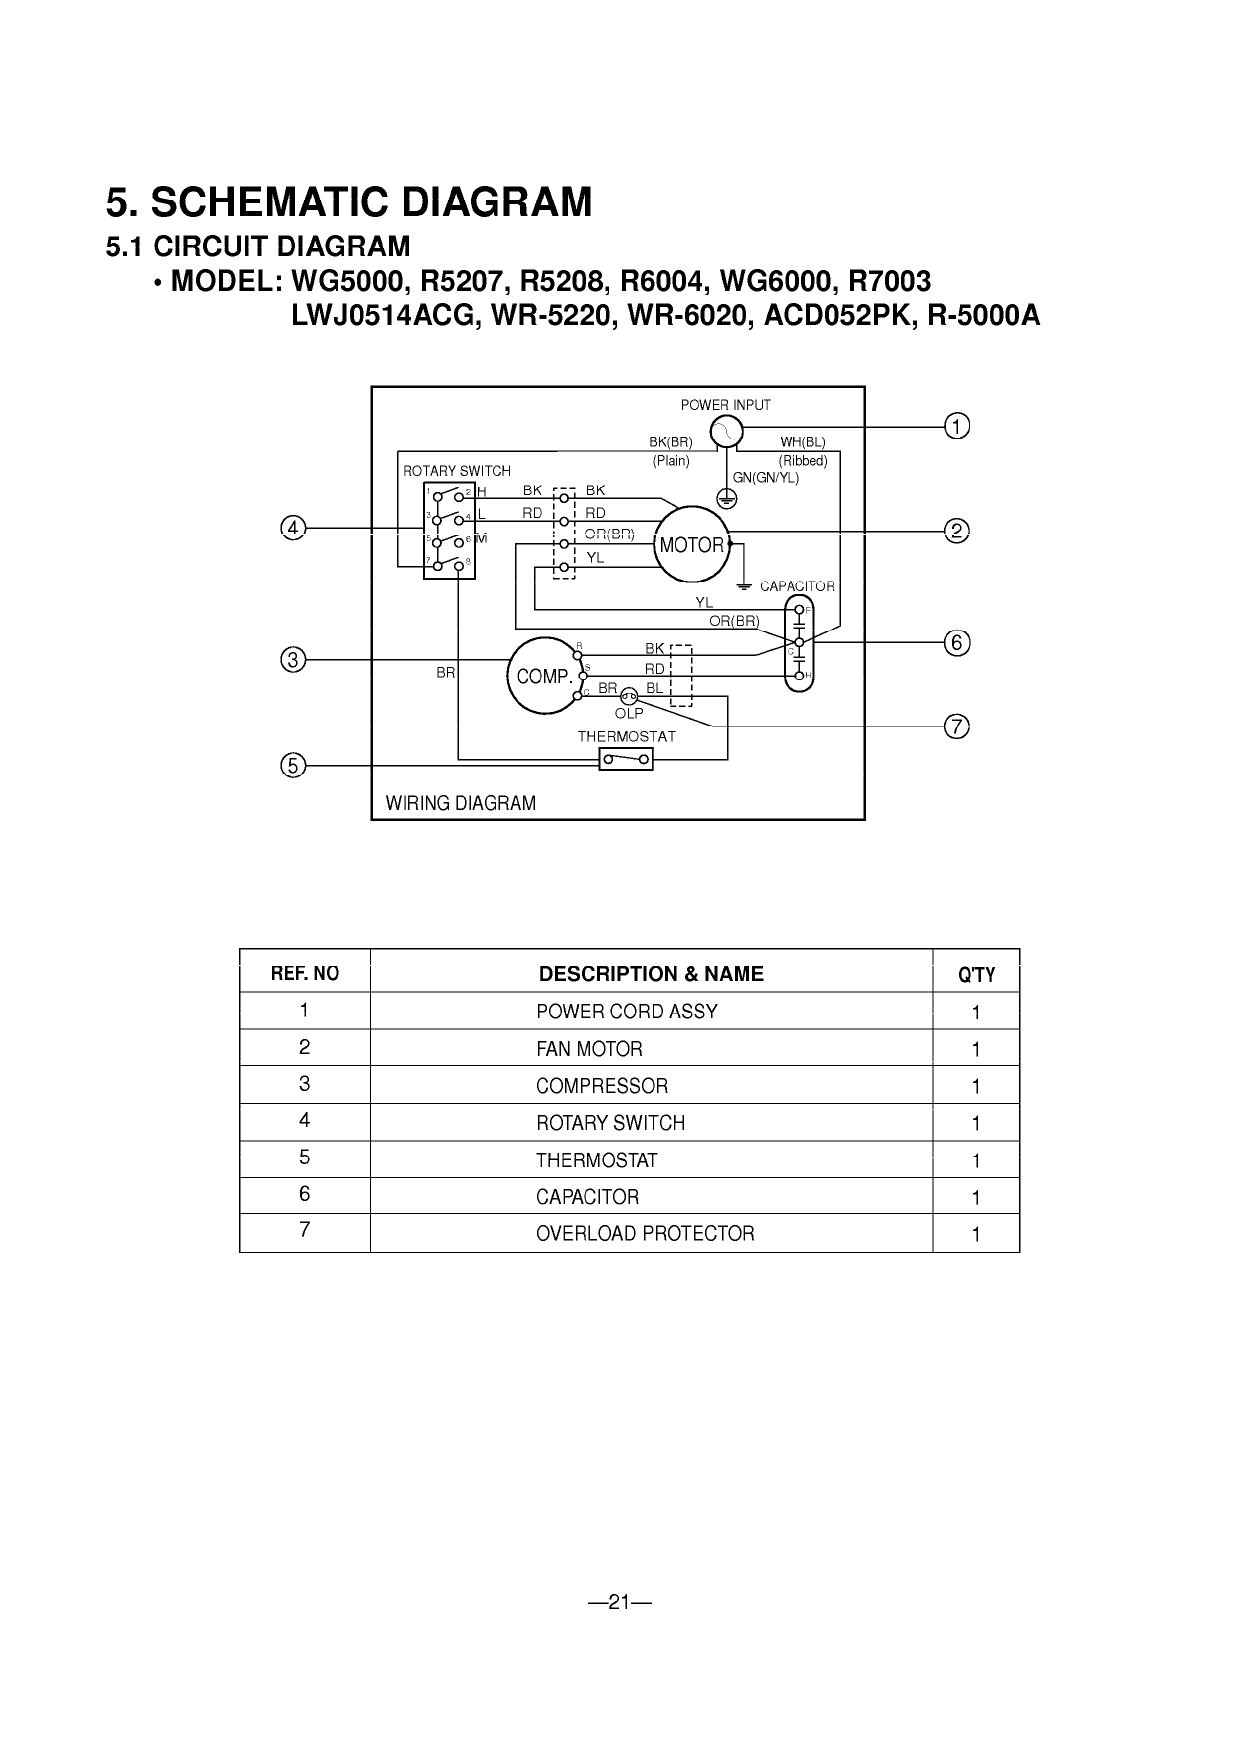 Goldstar R5207 Air Conditioner Wiring, Air Conditioner Thermostat Wiring Diagram Pdf